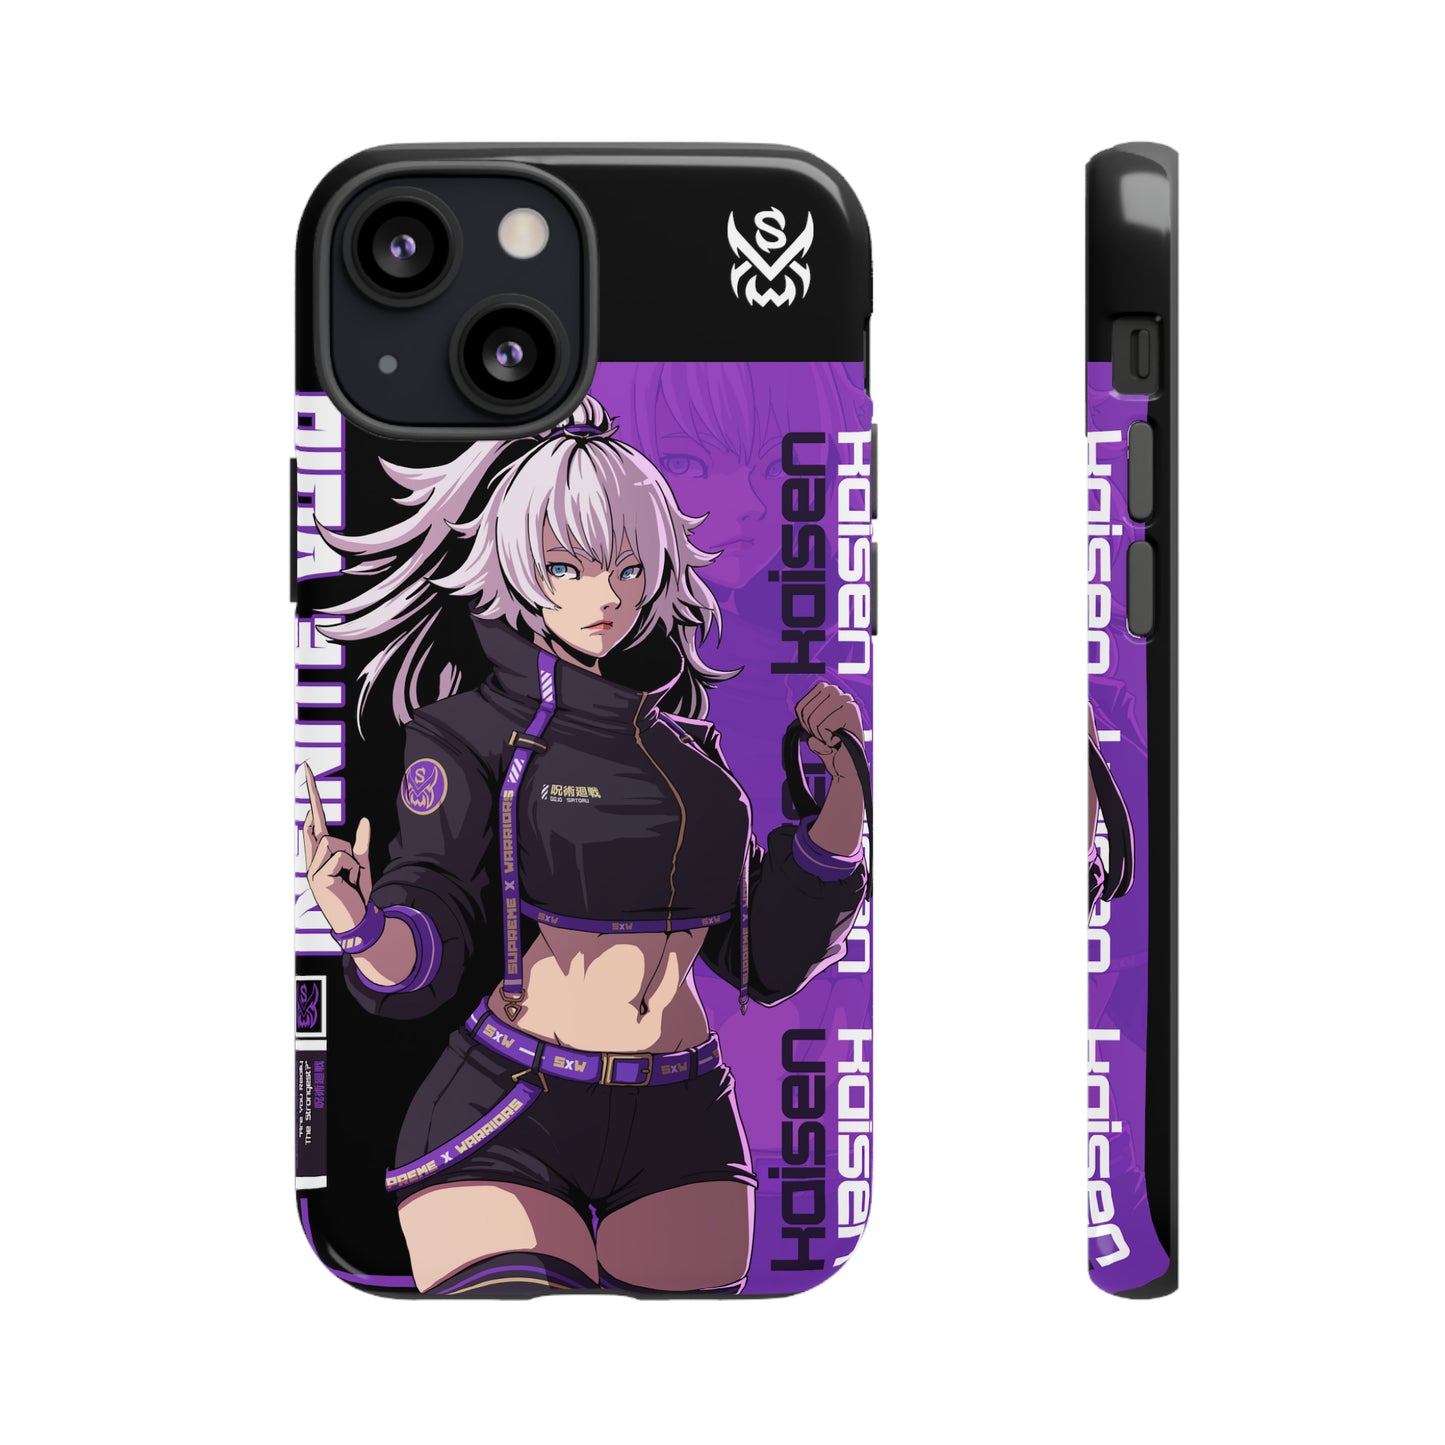 Infinite Void / iPhone Case - LIMITED